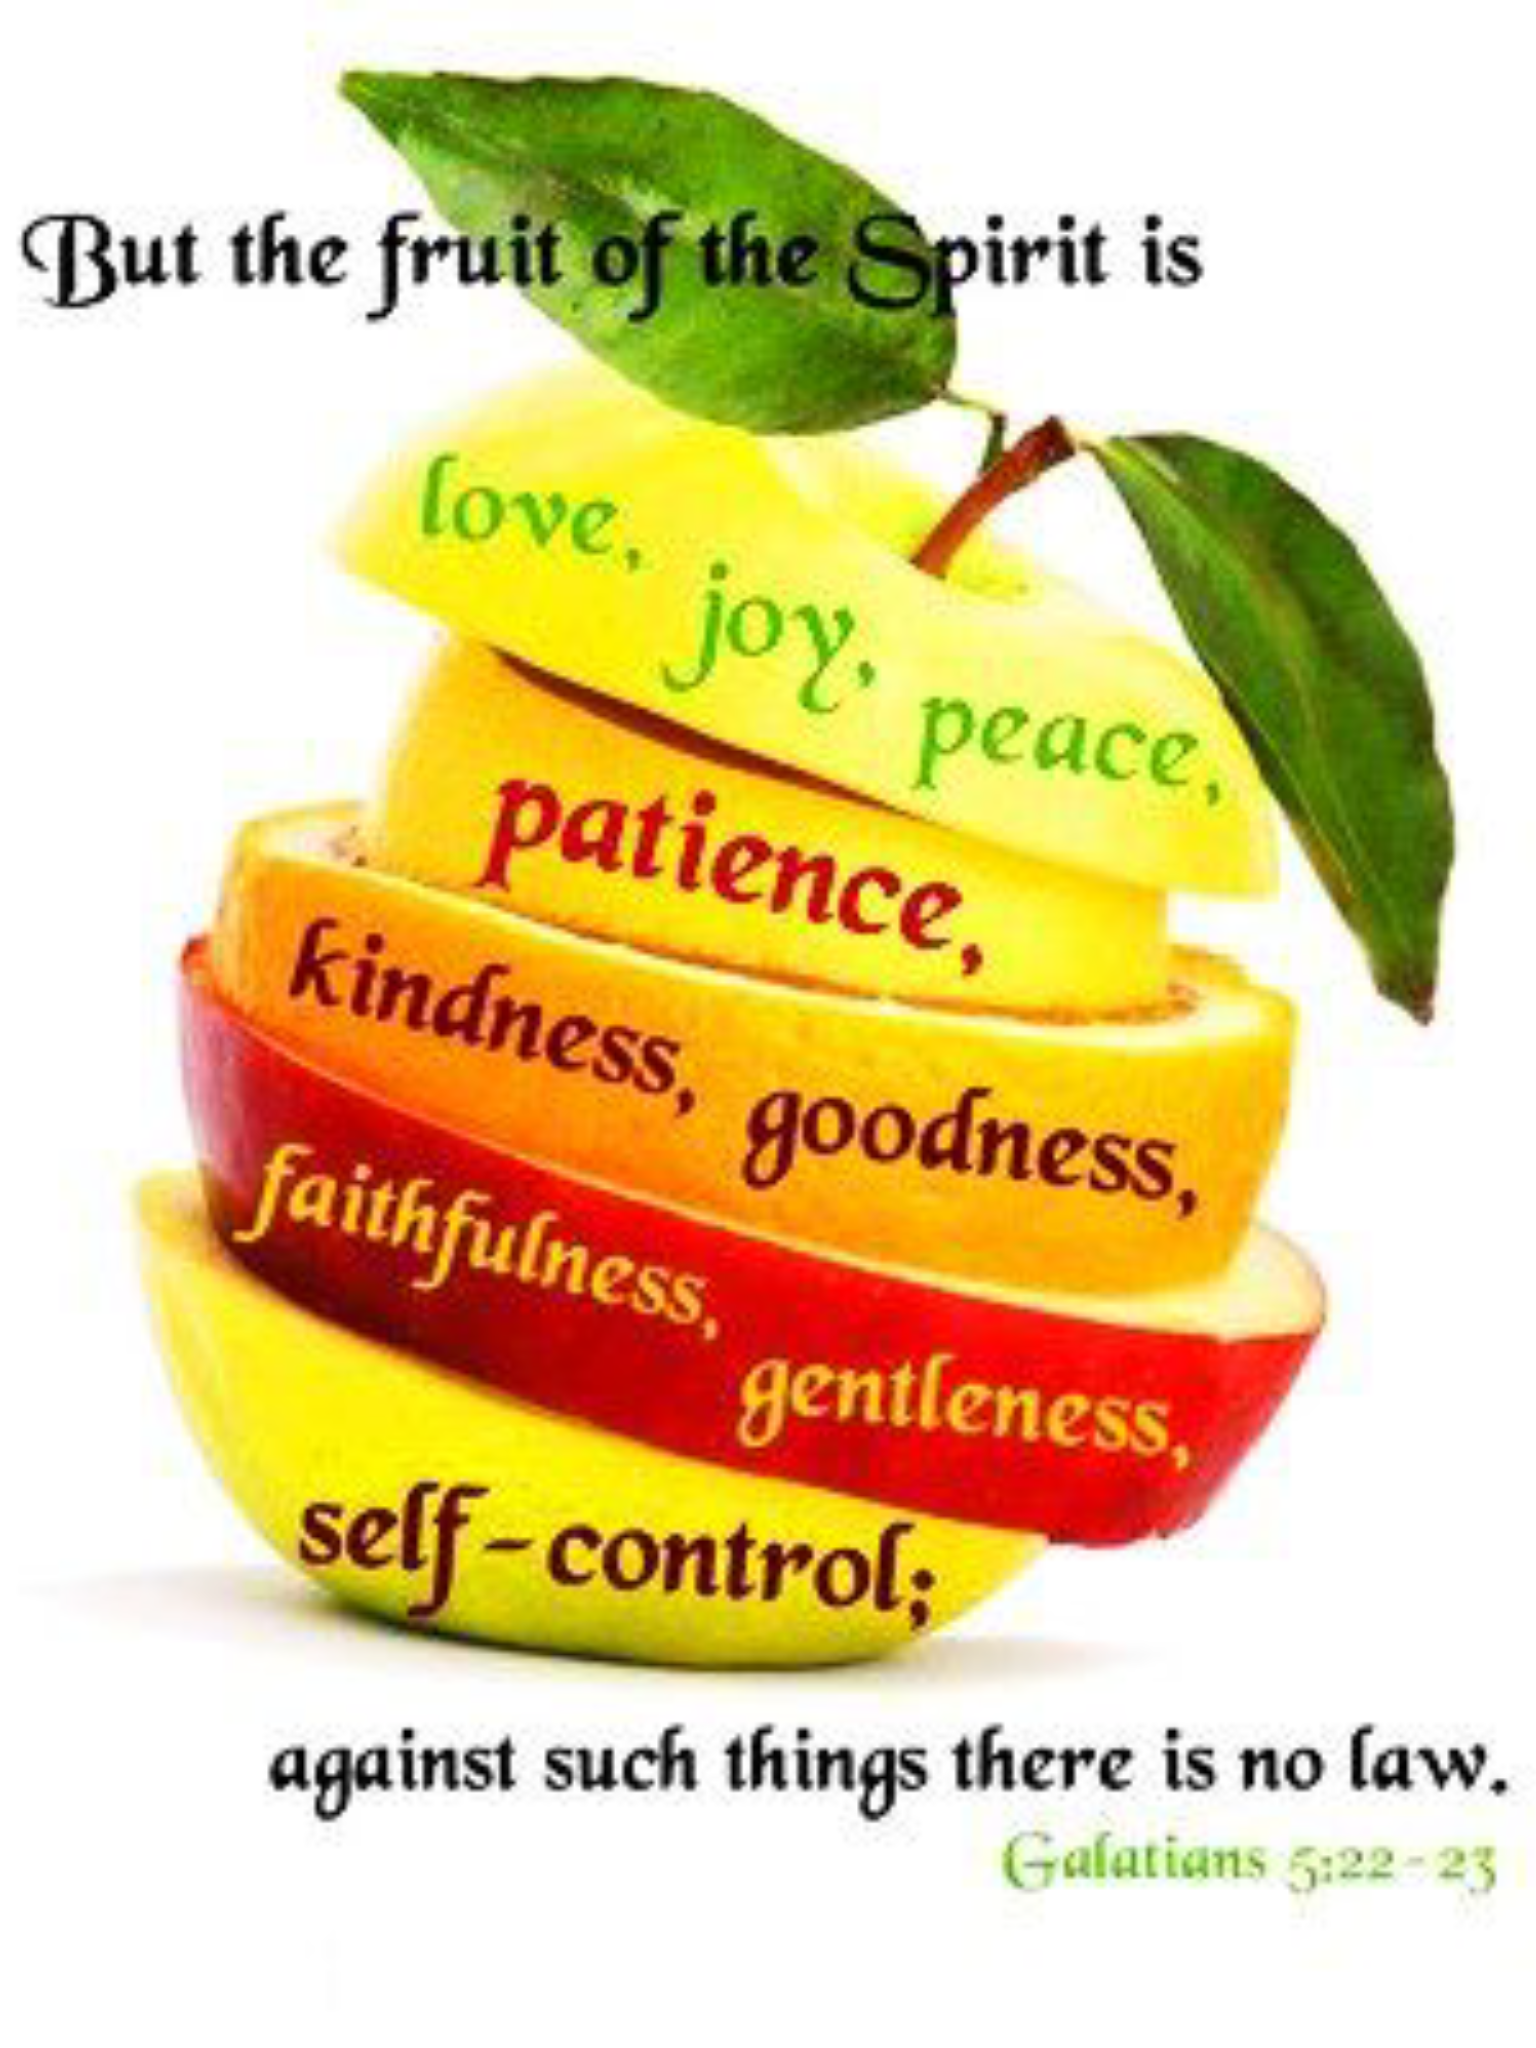 bearing-the-fruit-of-the-spirit-wholeness-oneness-justice